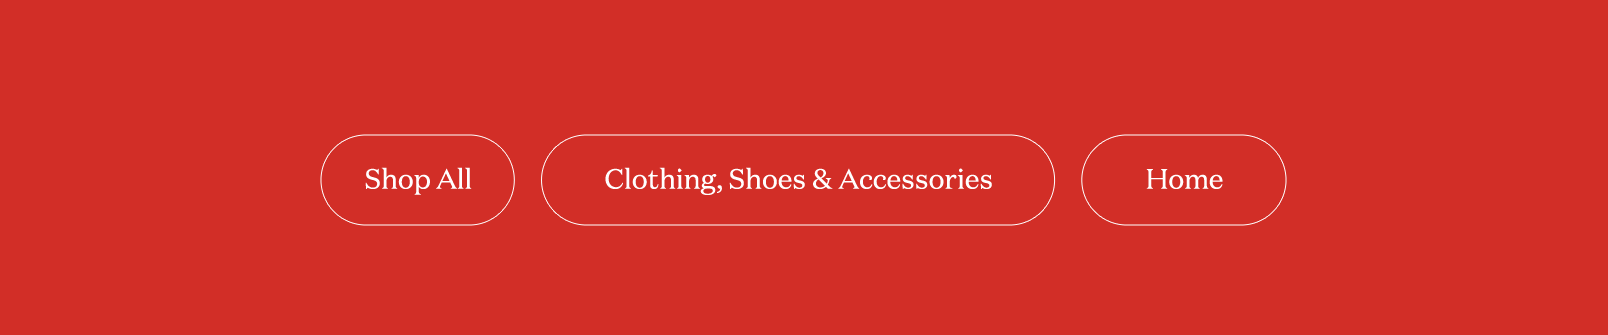 Shop All, Clothing, Shoes & Accessories, Home